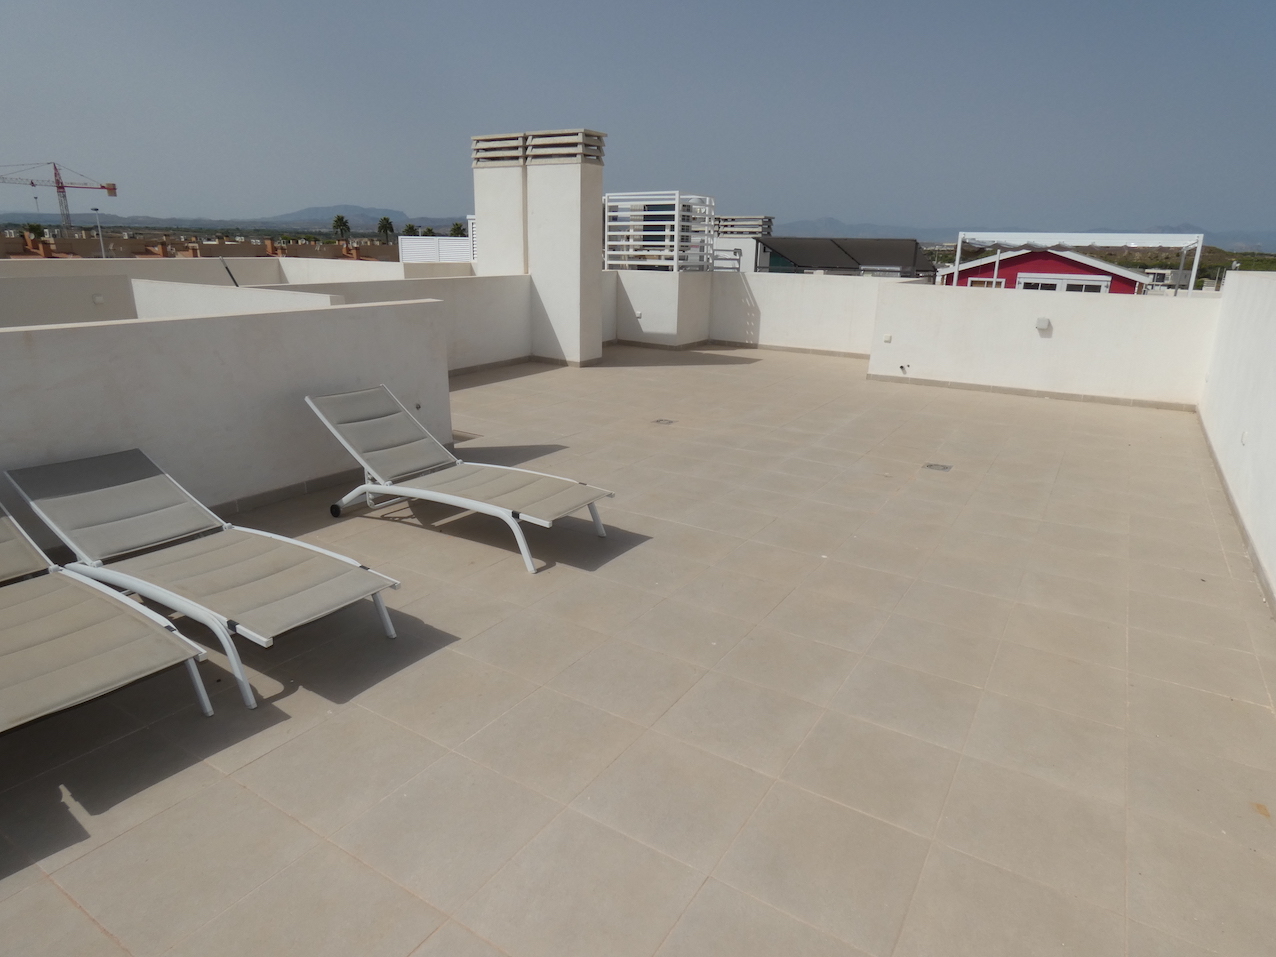 3 bedroom apartment / flat for sale in Gran Alacant, Costa Blanca